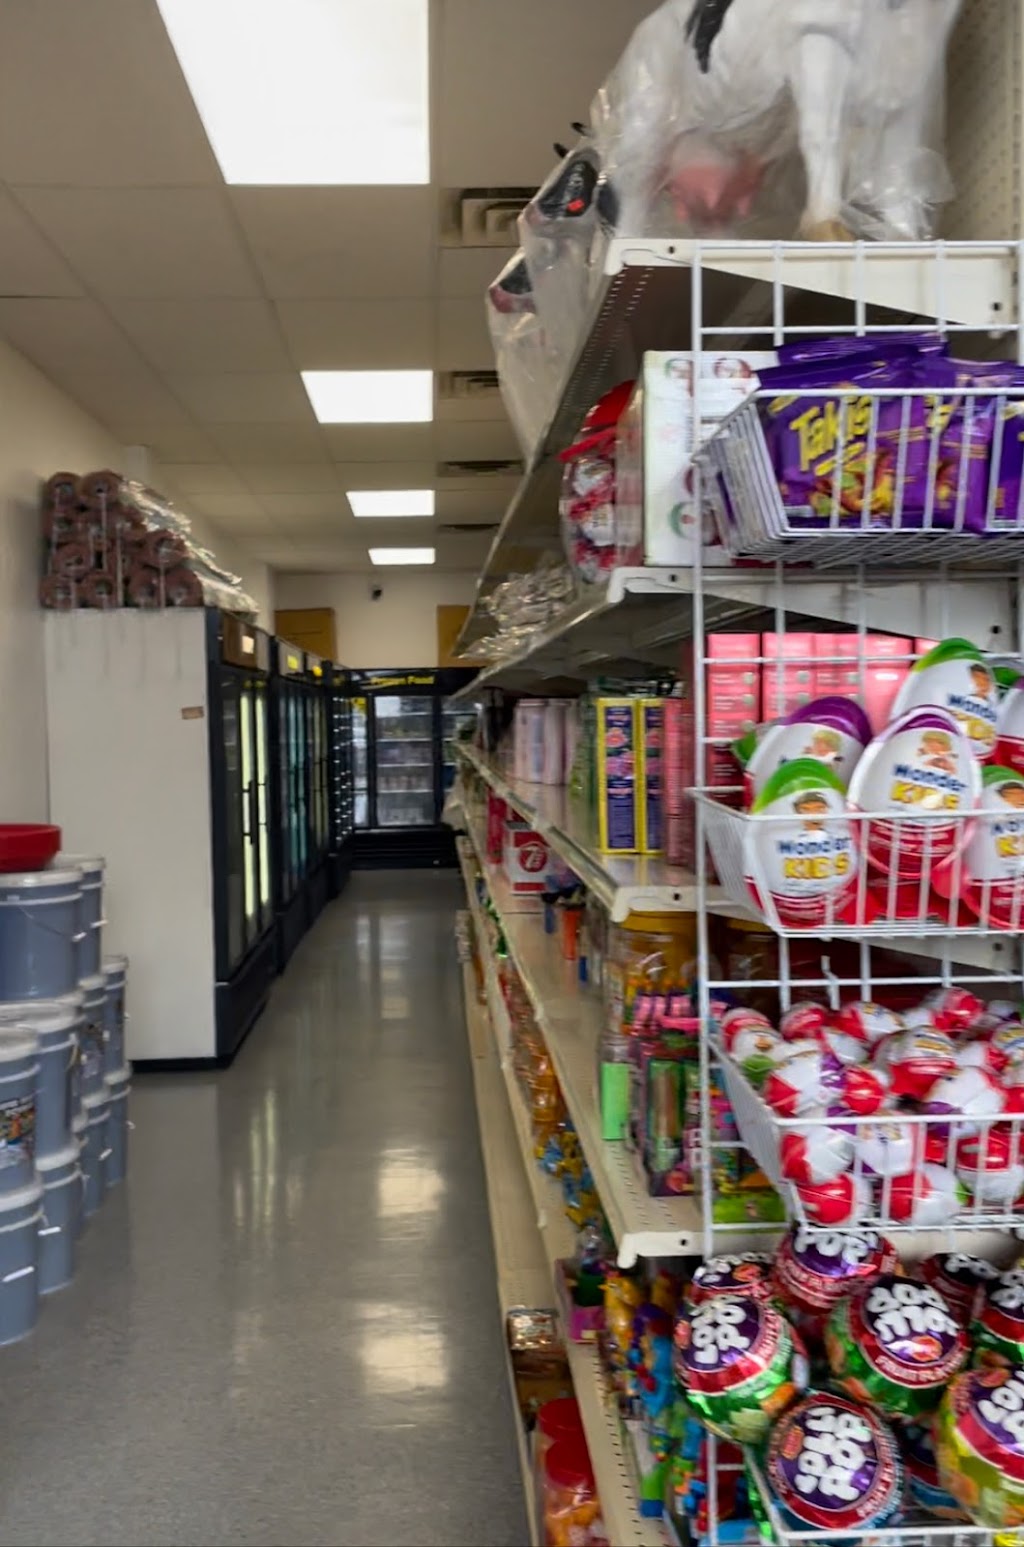 Budget Groceries | 531 South Ave, Tallmadge, OH 44278 | Phone: (330) 934-1412